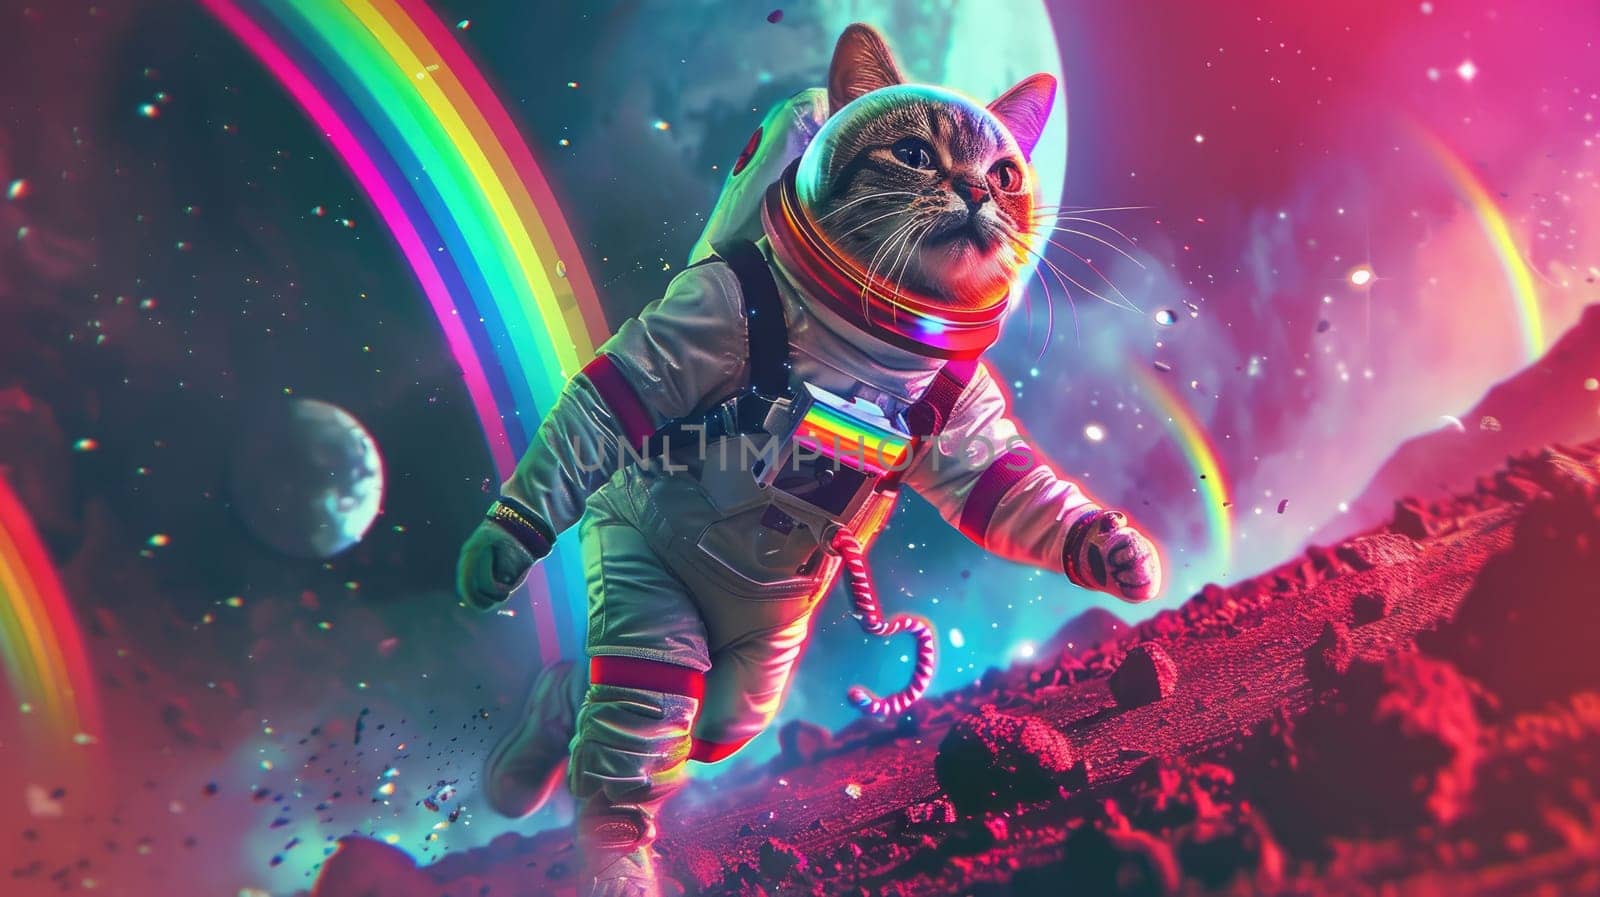 A cat in space suit with rainbow, Abstract wallpaper of a cat in space with rainbow, Colorful art of animal.